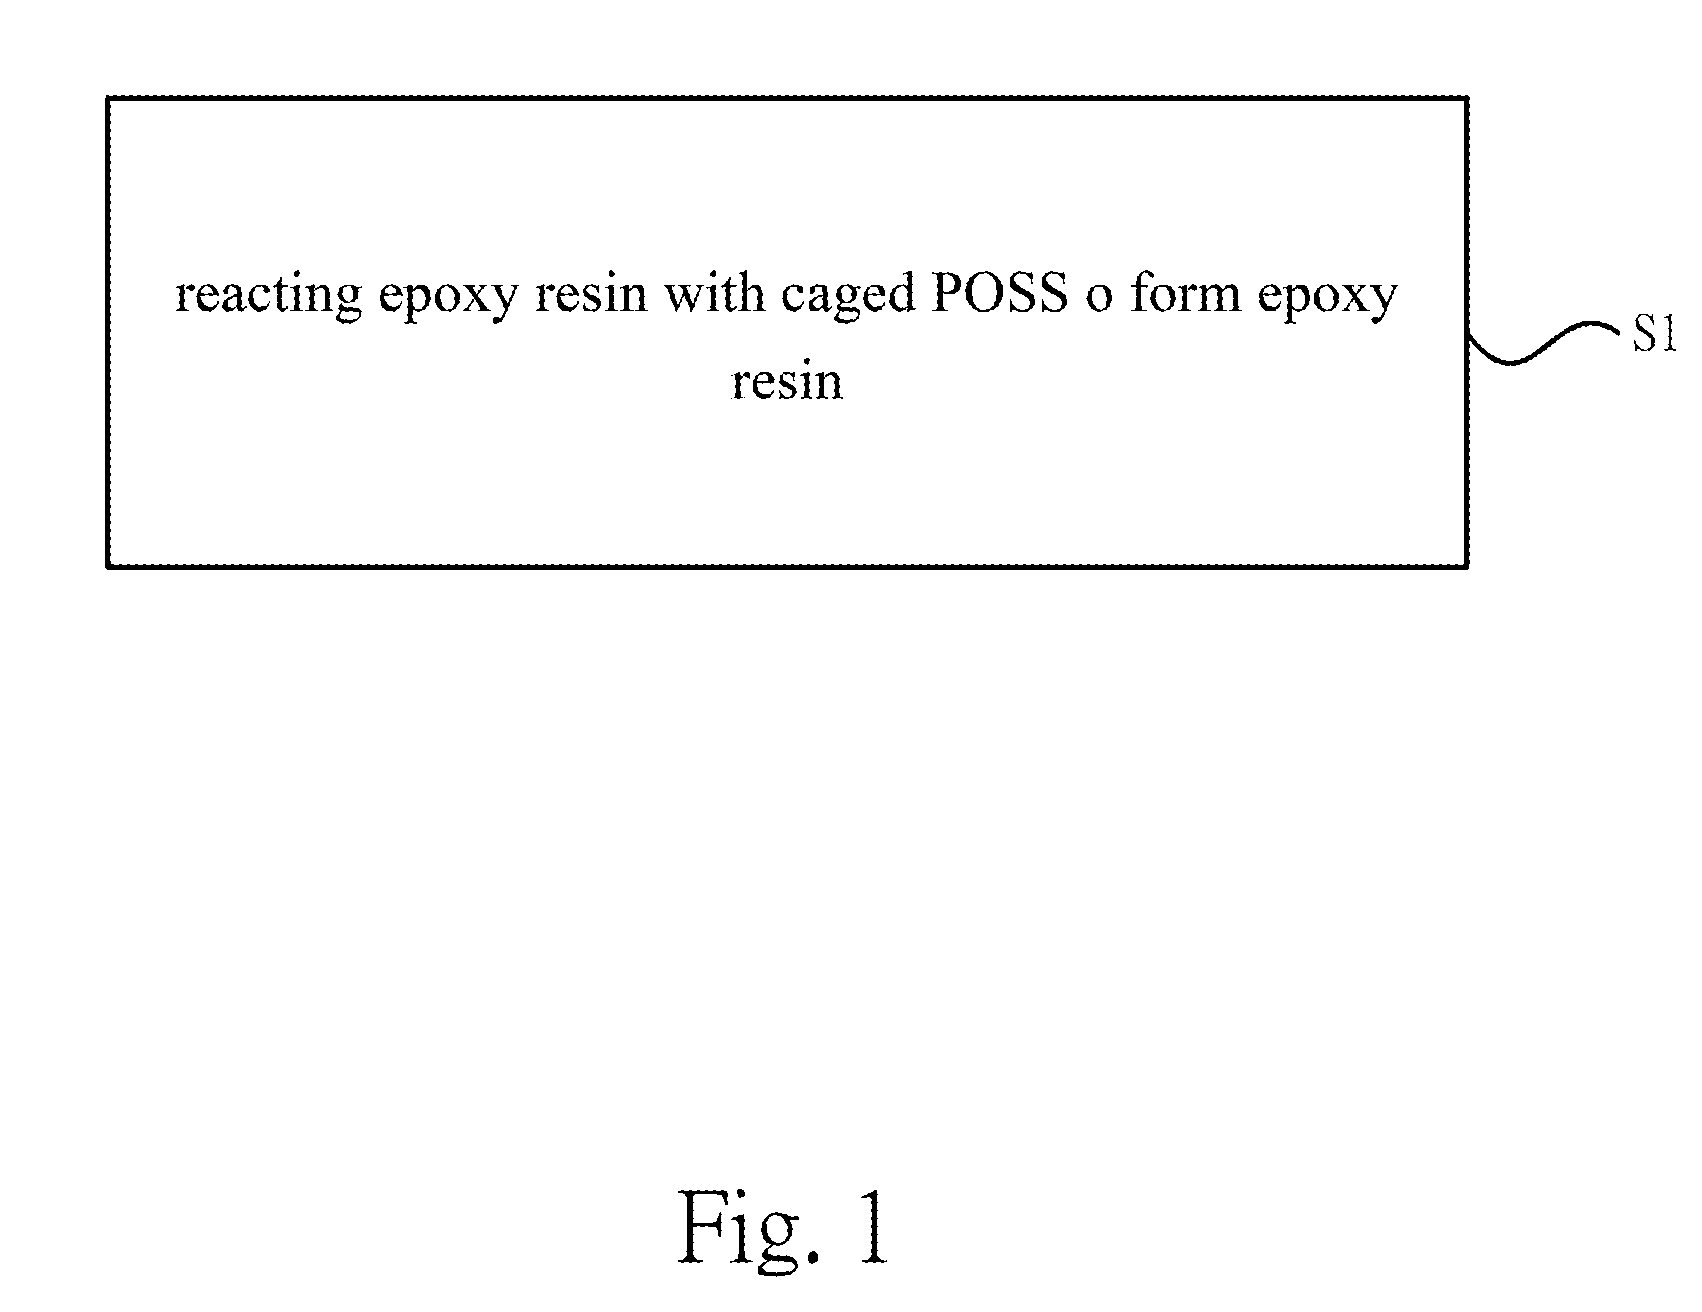 Epoxy resin containing side-chain-tethered caged POSS and preparation method thereof as well as epoxy resin material containing POSS-epoxy and preparation method thereof